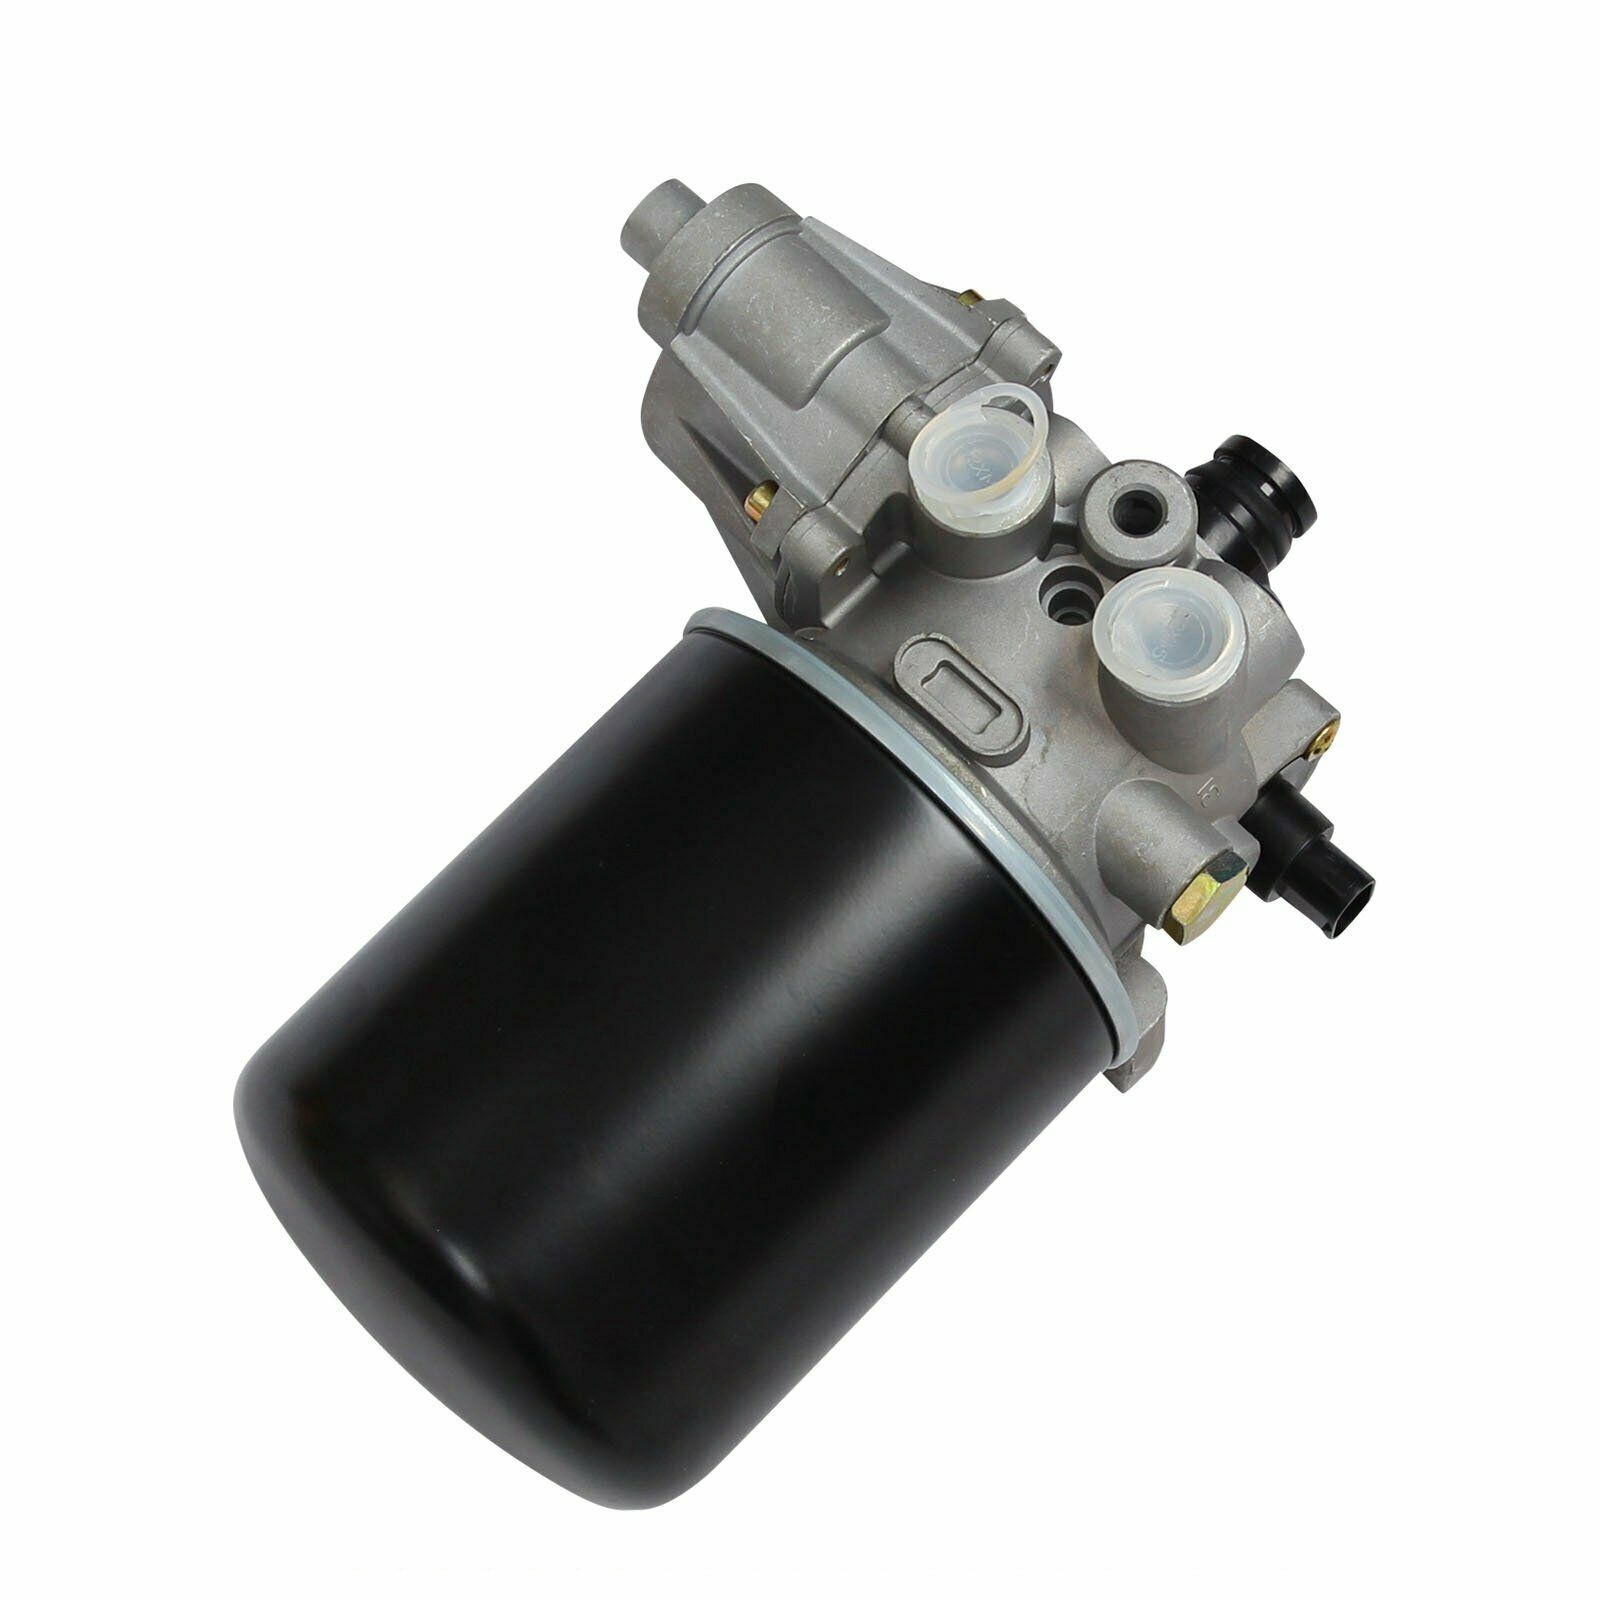 R955205 REPLACES MERITOR WABCO SYSTEM SAVER 1200 SERIES AIR DRYER ASSEMBLY